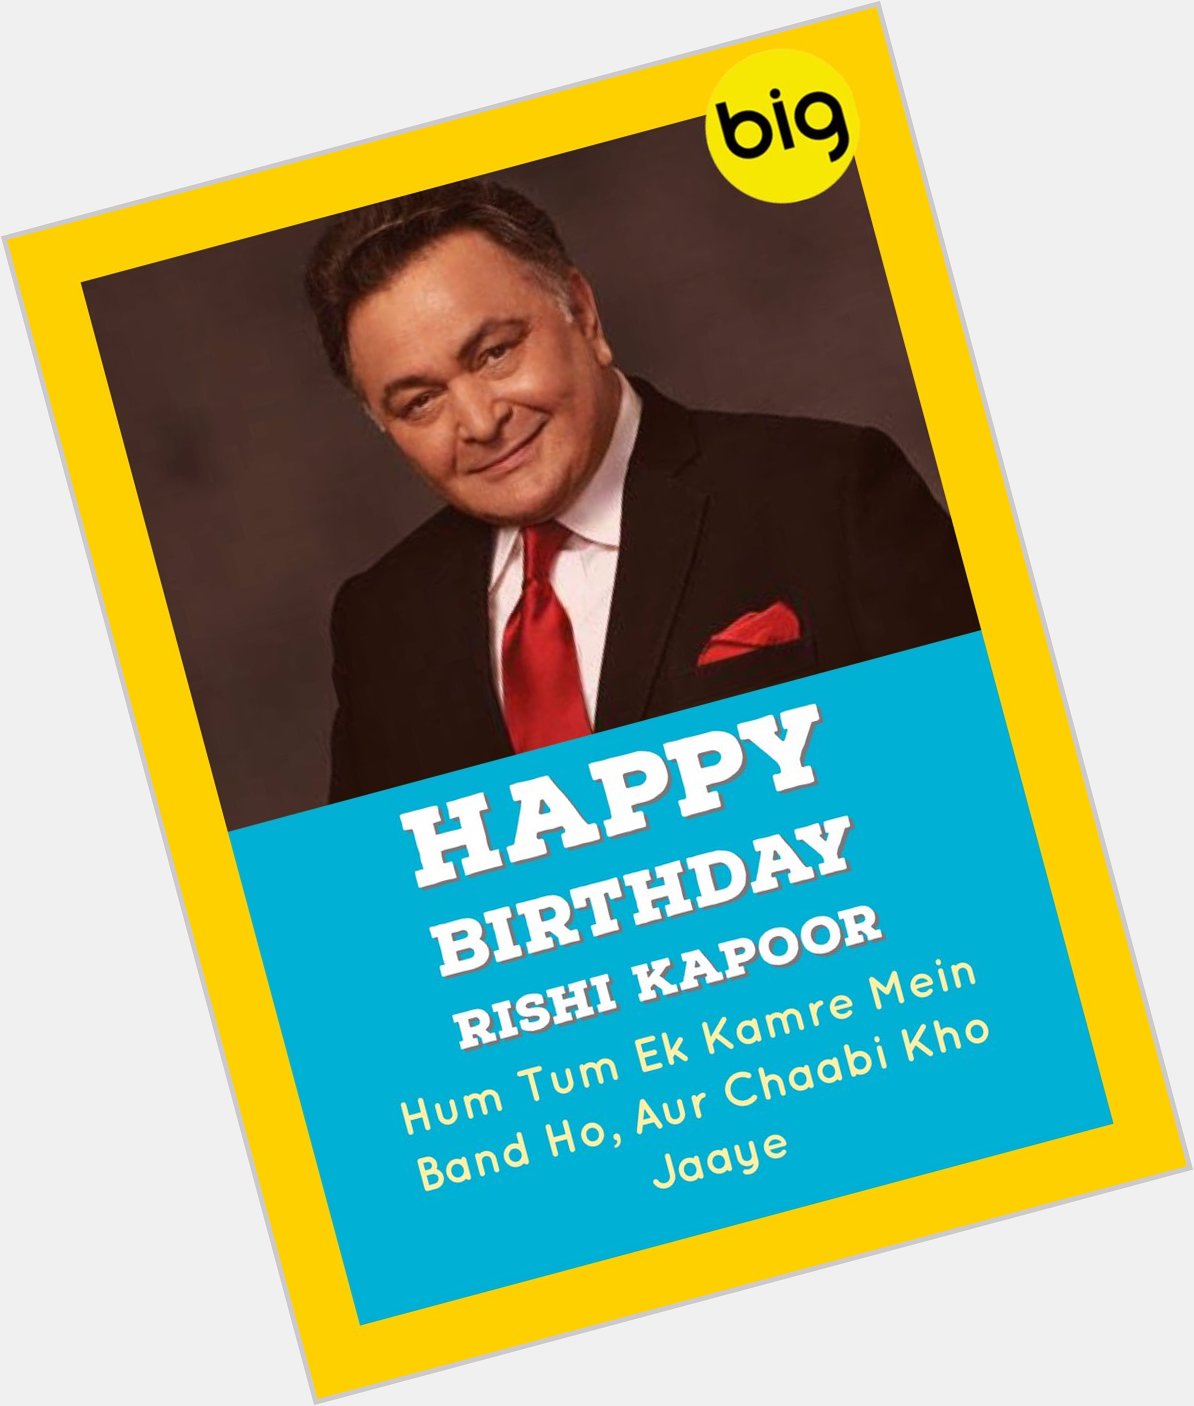 Happy Birthday Rishi Kapoor blessings and Love from 